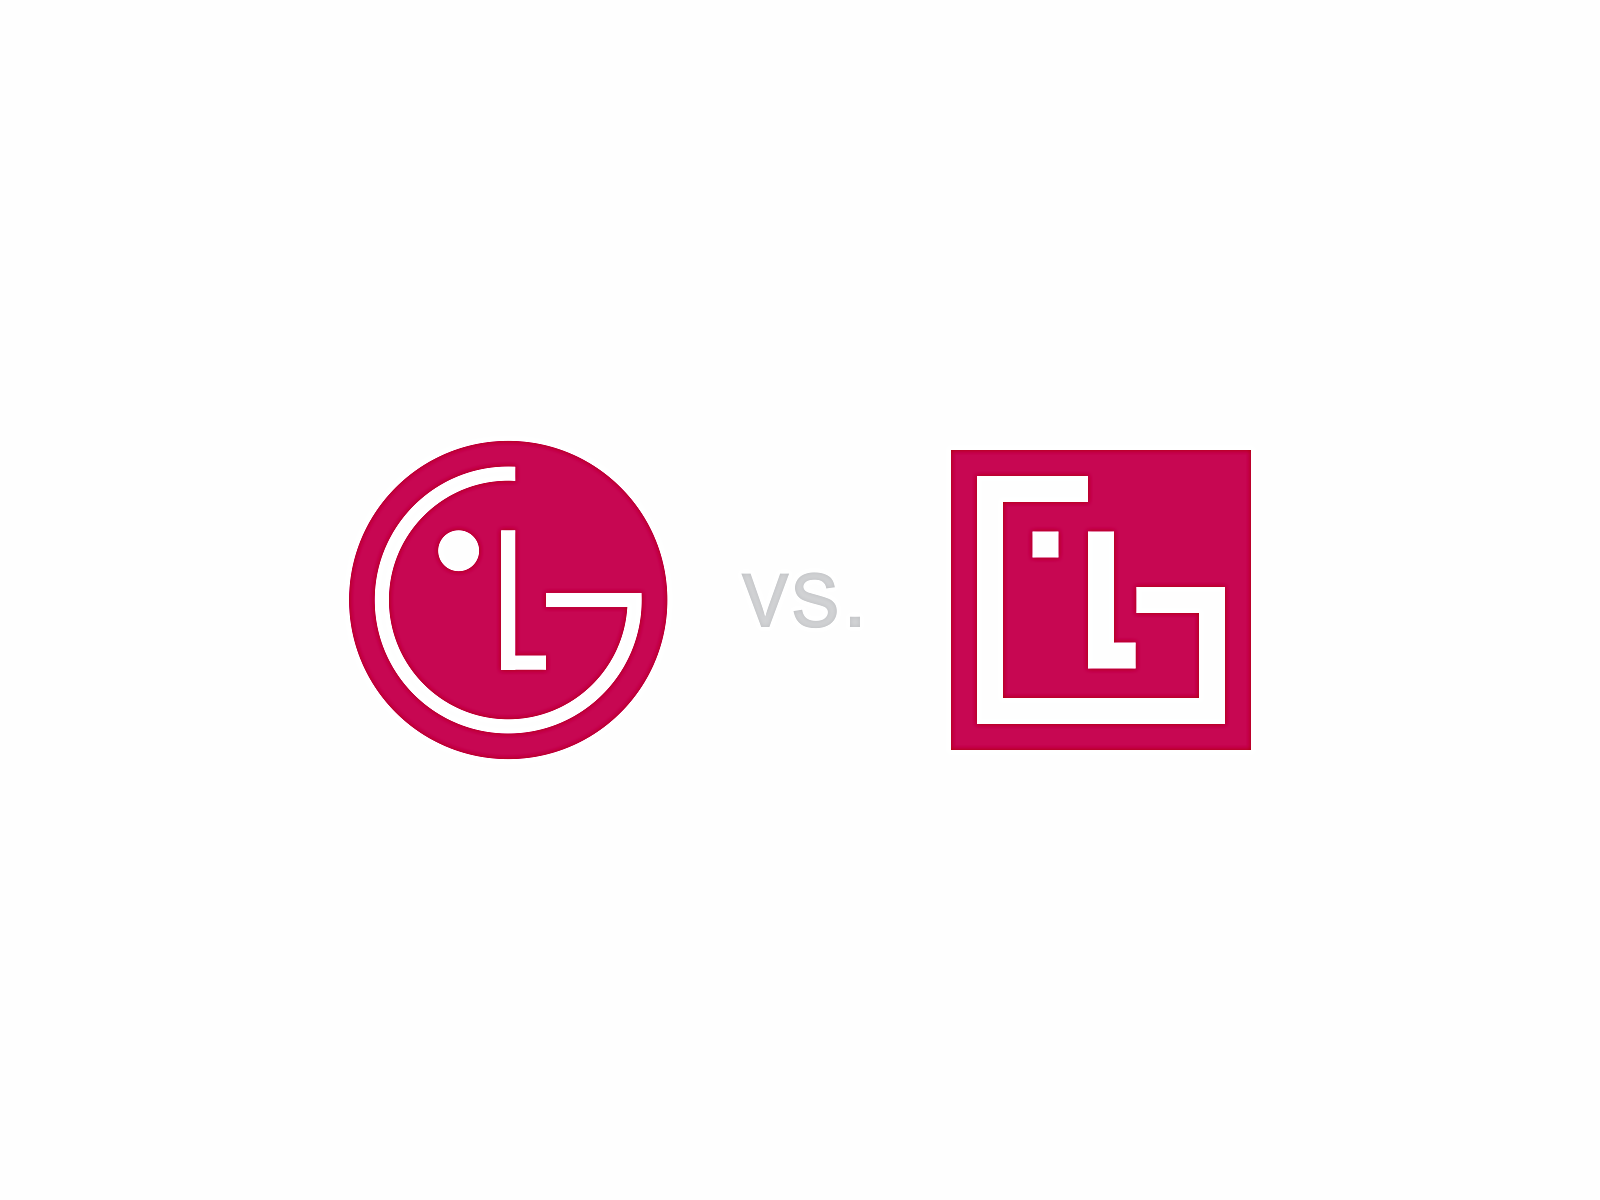 LG logo redesign by vali21 on Dribbble